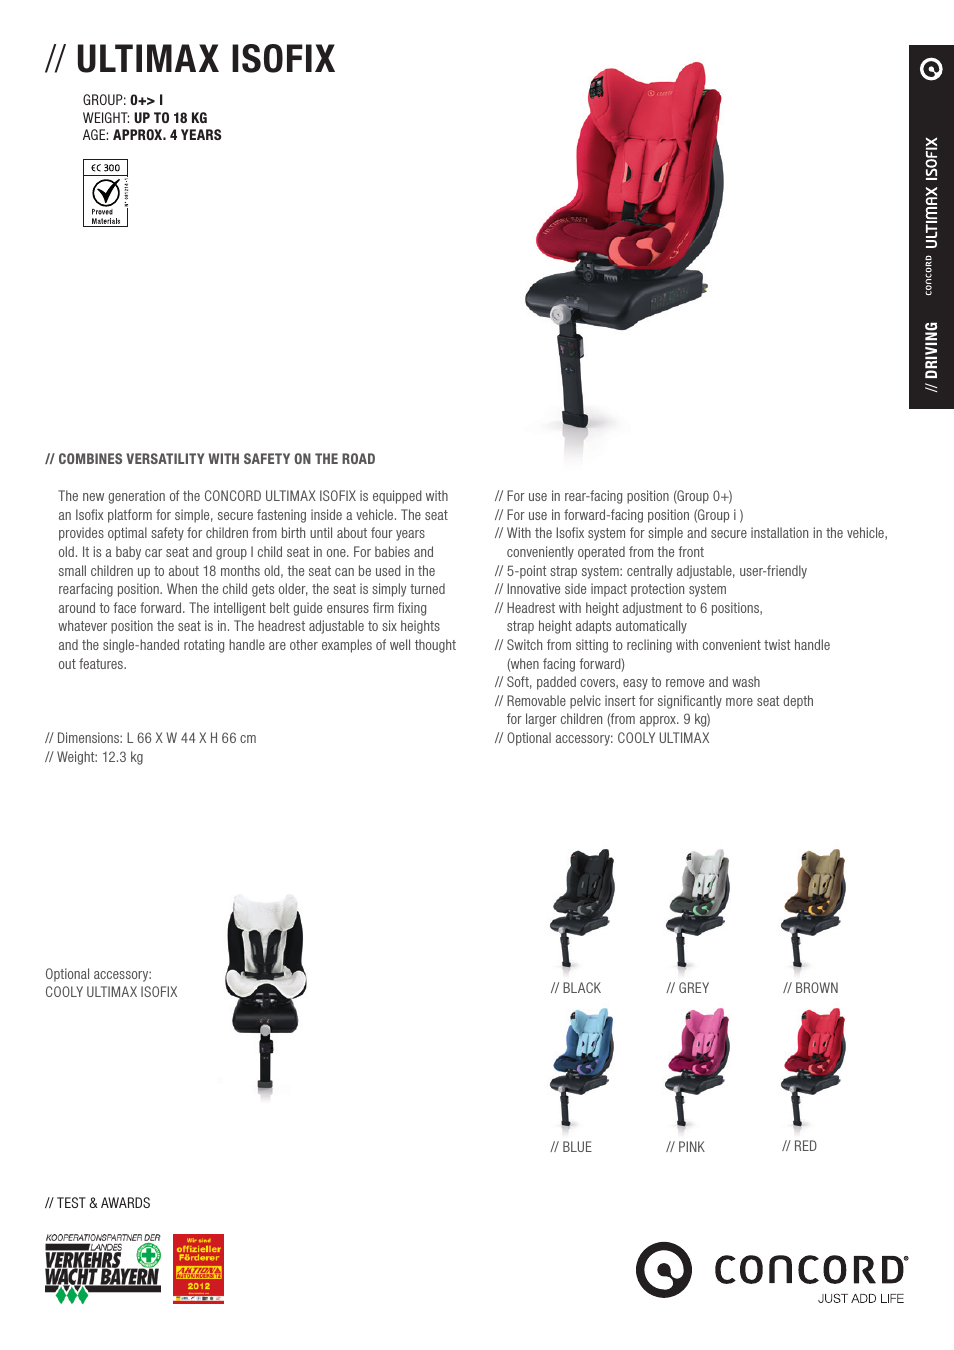 ULTIMAX ISOFIX PRODUCT INFORMATION